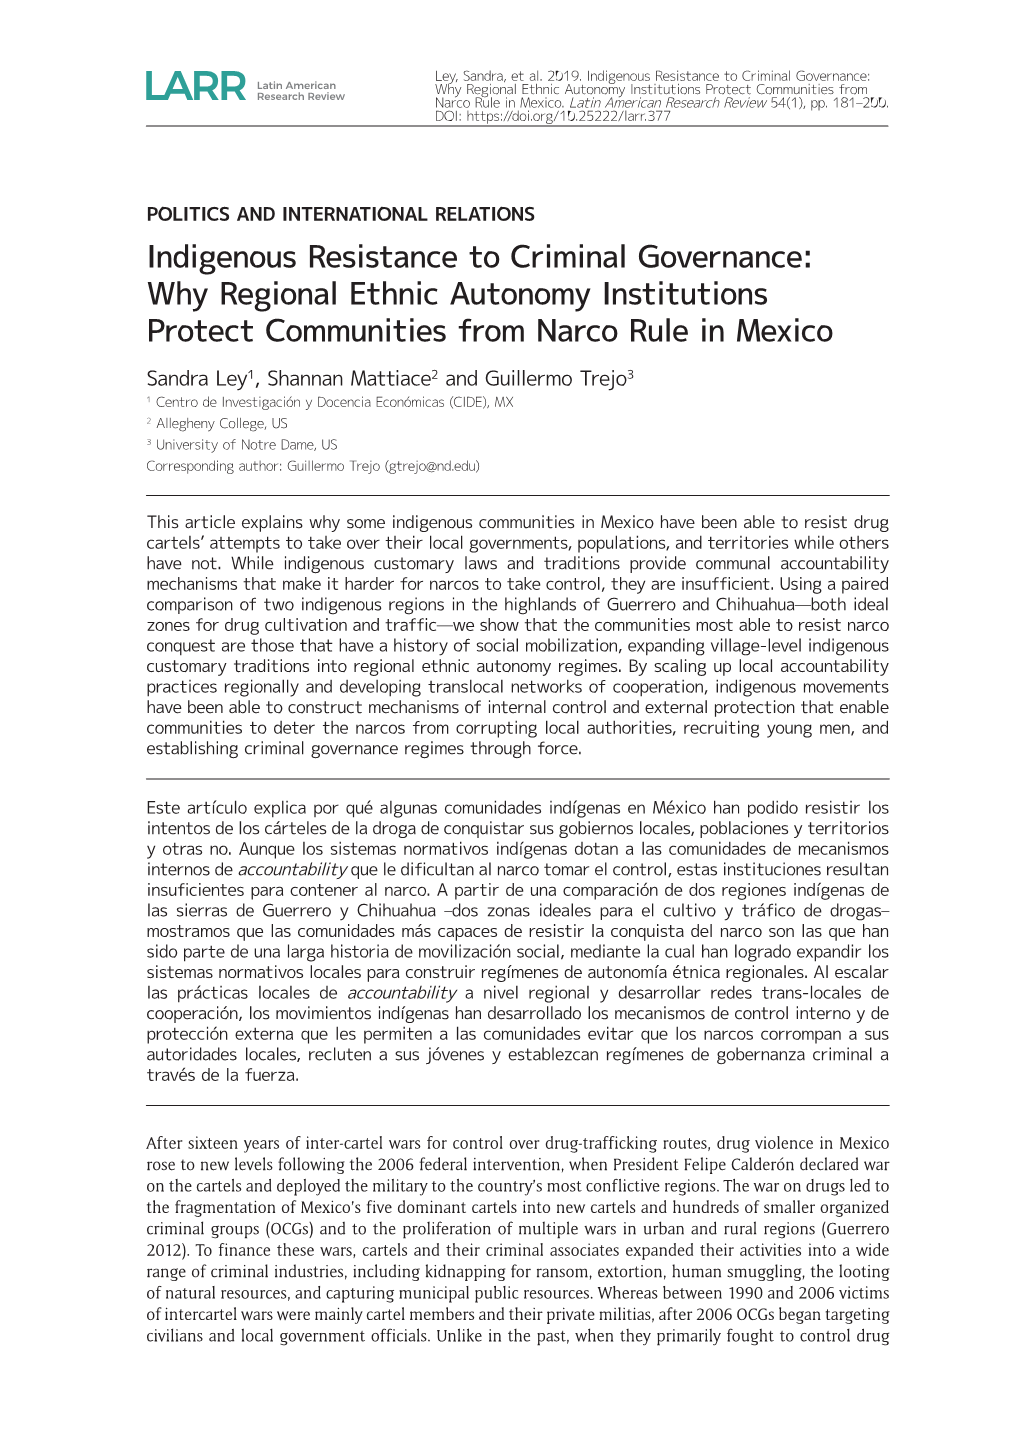 Indigenous Resistance to Criminal Governance: Why Regional Ethnic Autonomy Institutions Protect Communities from Narco Rule in Mexico